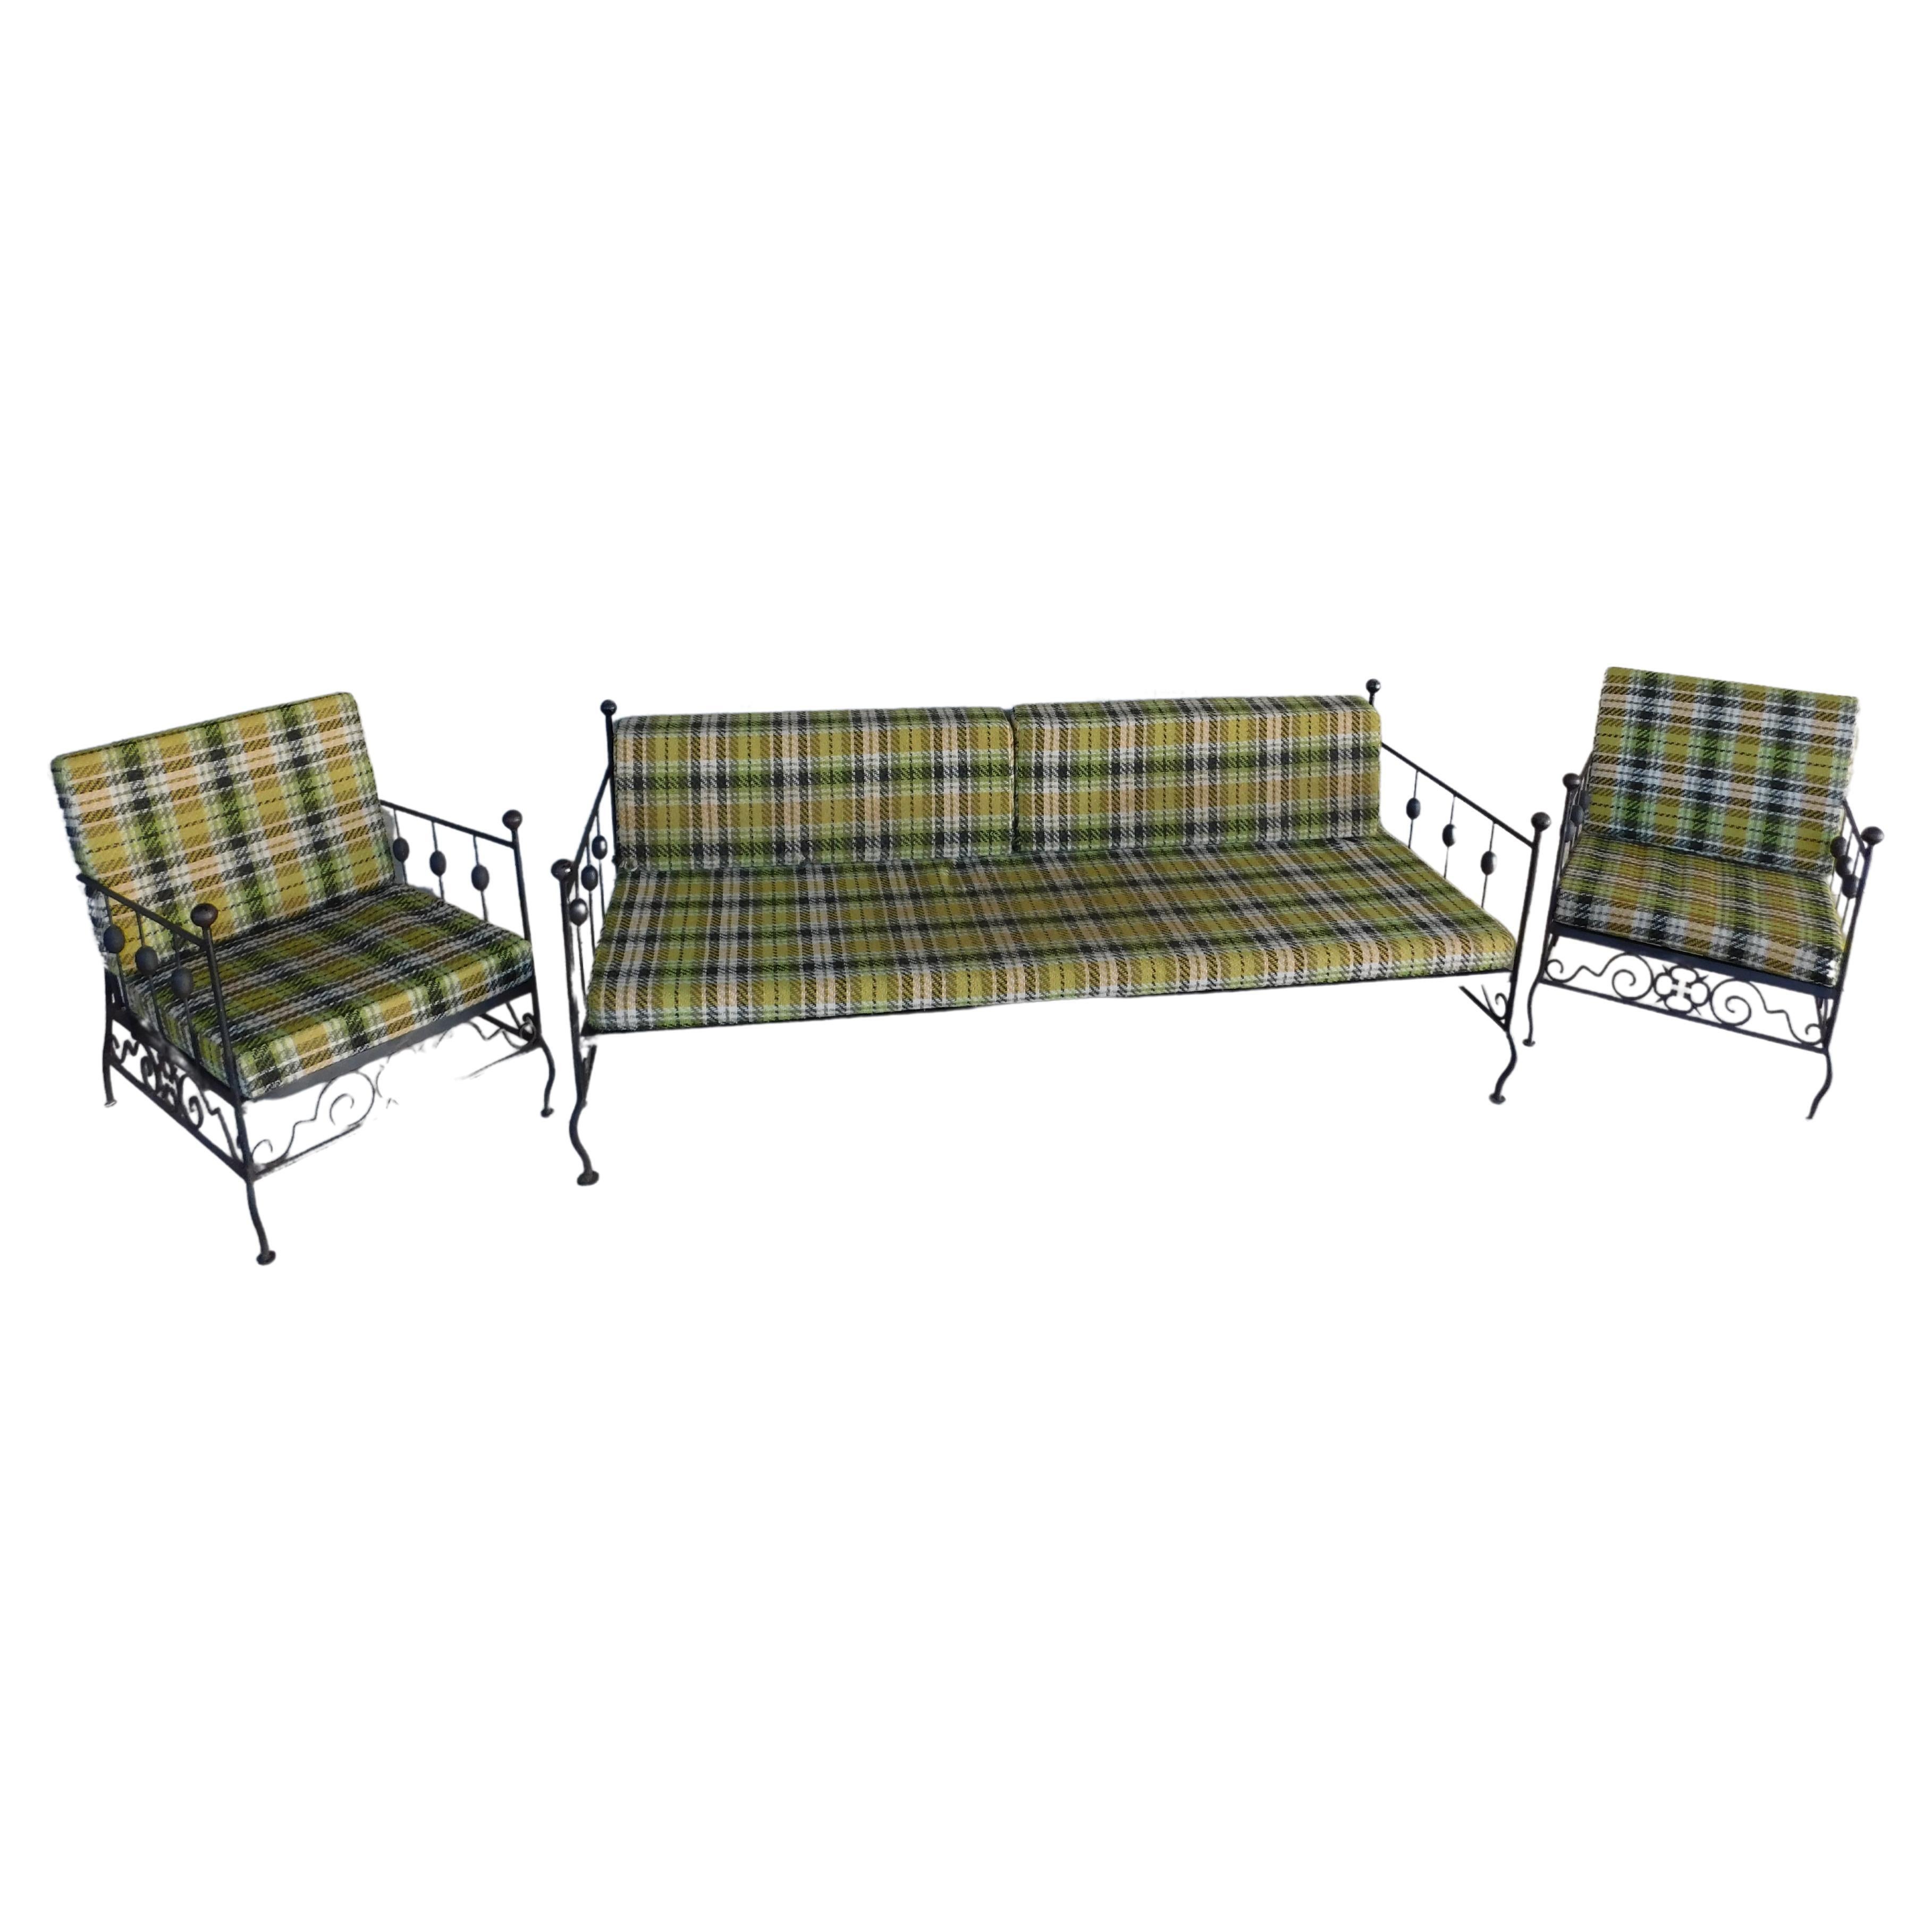 Vintage wrought iron 3 piece set attributed to Authur Umanuff. Unique Cattail Modern design sides, Hairpin style backing, with a Spanish clover motif along the lower front and side rails. Original vintage plaid upholstered cushions. Comfortable club